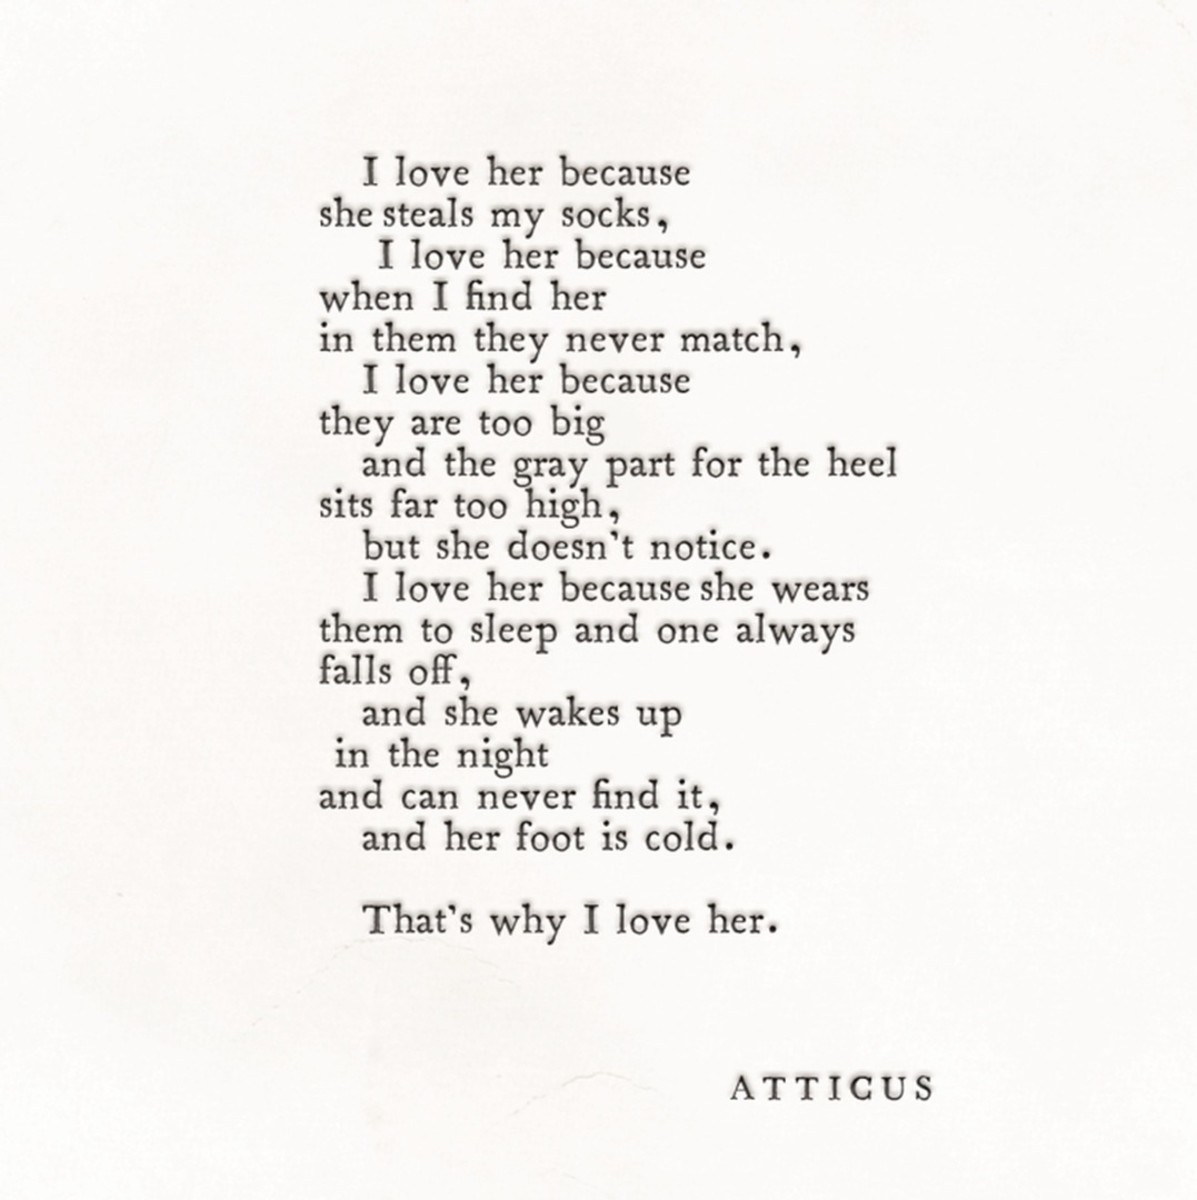 love-her-wild-atticus-poetry-book-critical-review